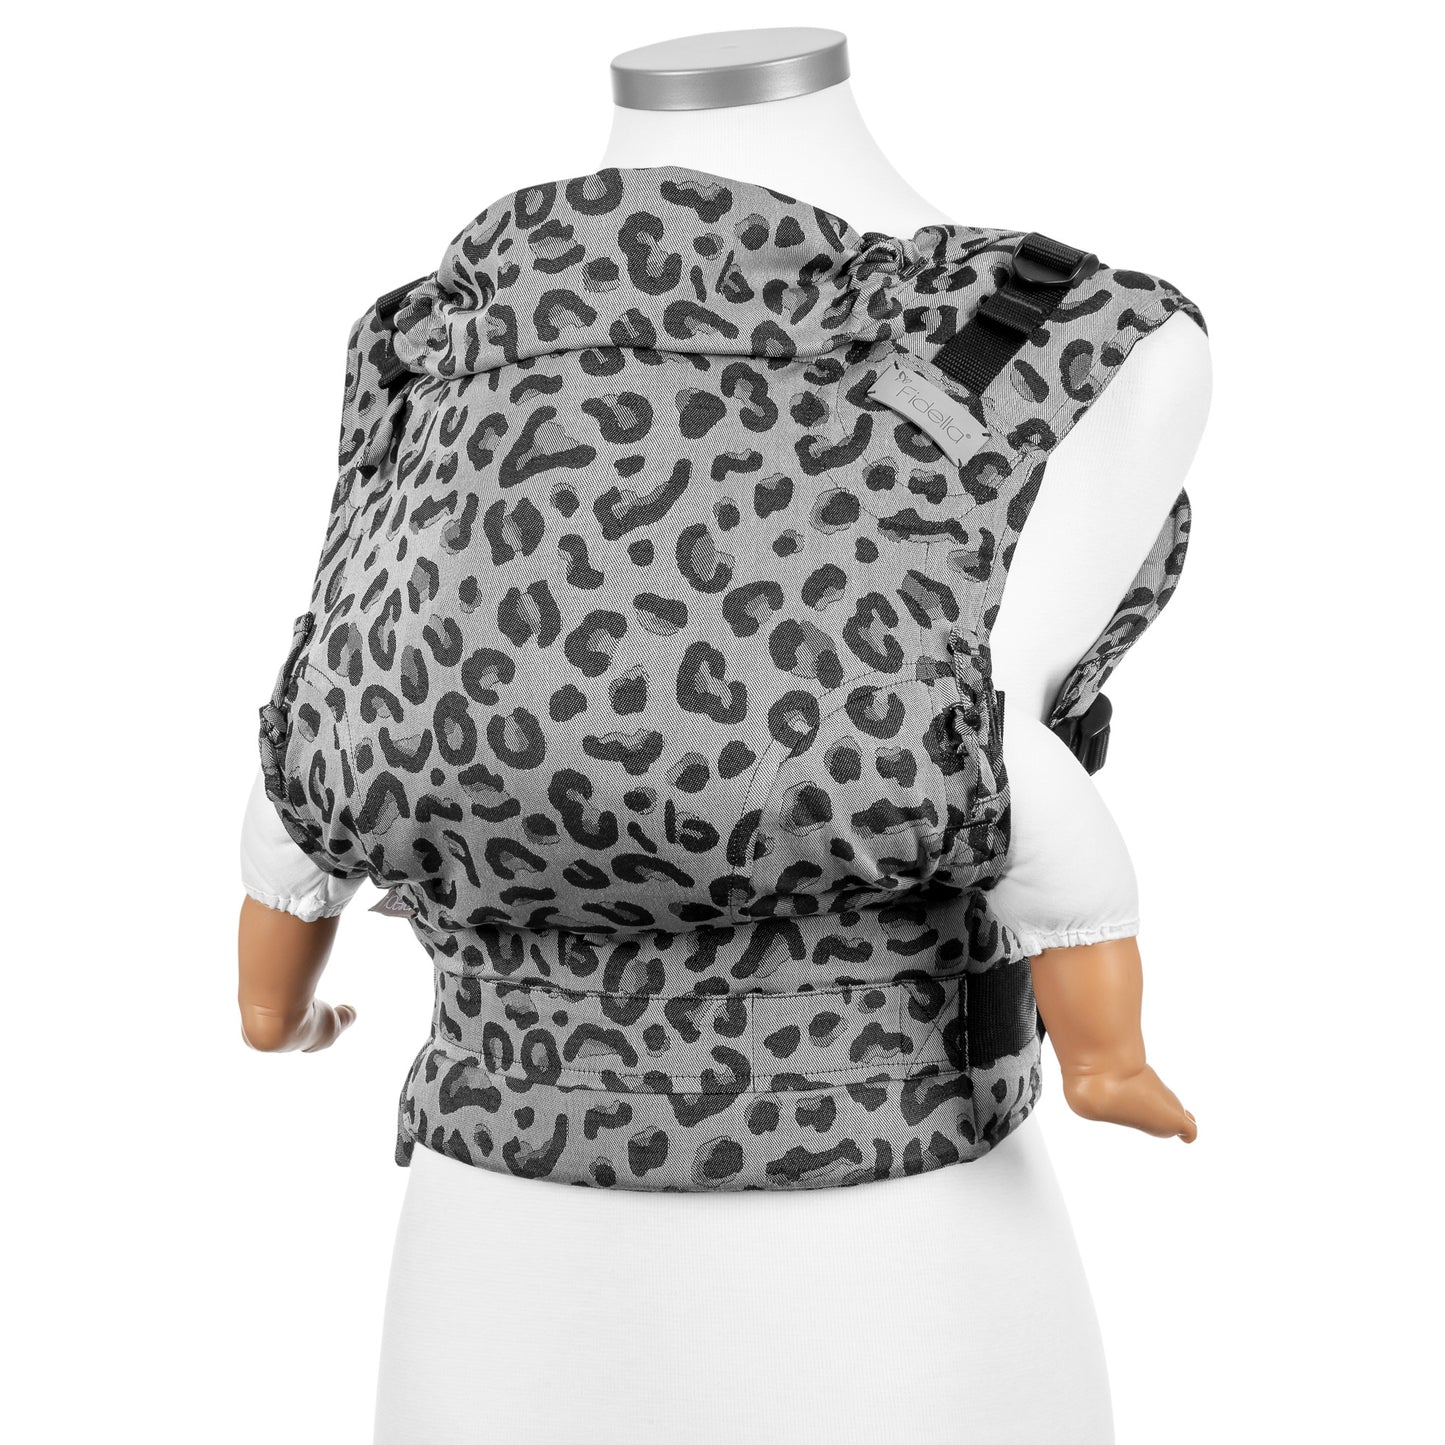 Fusion - Fullbuckle Baby Carrier - Leopard - silver